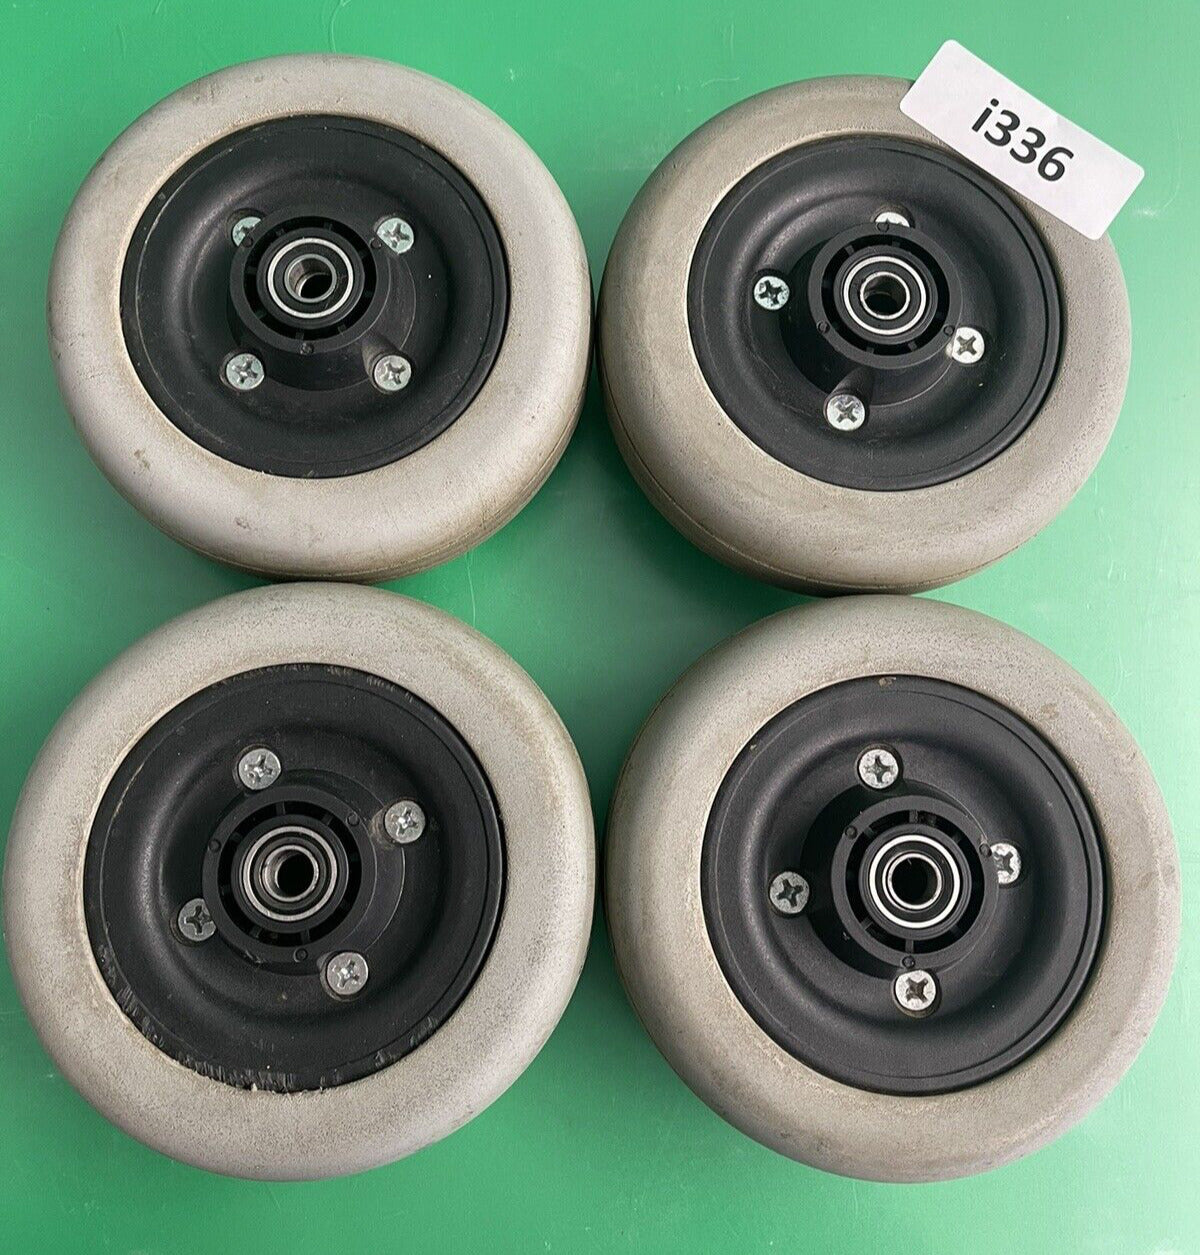 Invacare Caster Wheels for Pronto Sure Step & TDX Wheelchairs -set of 4- #i336